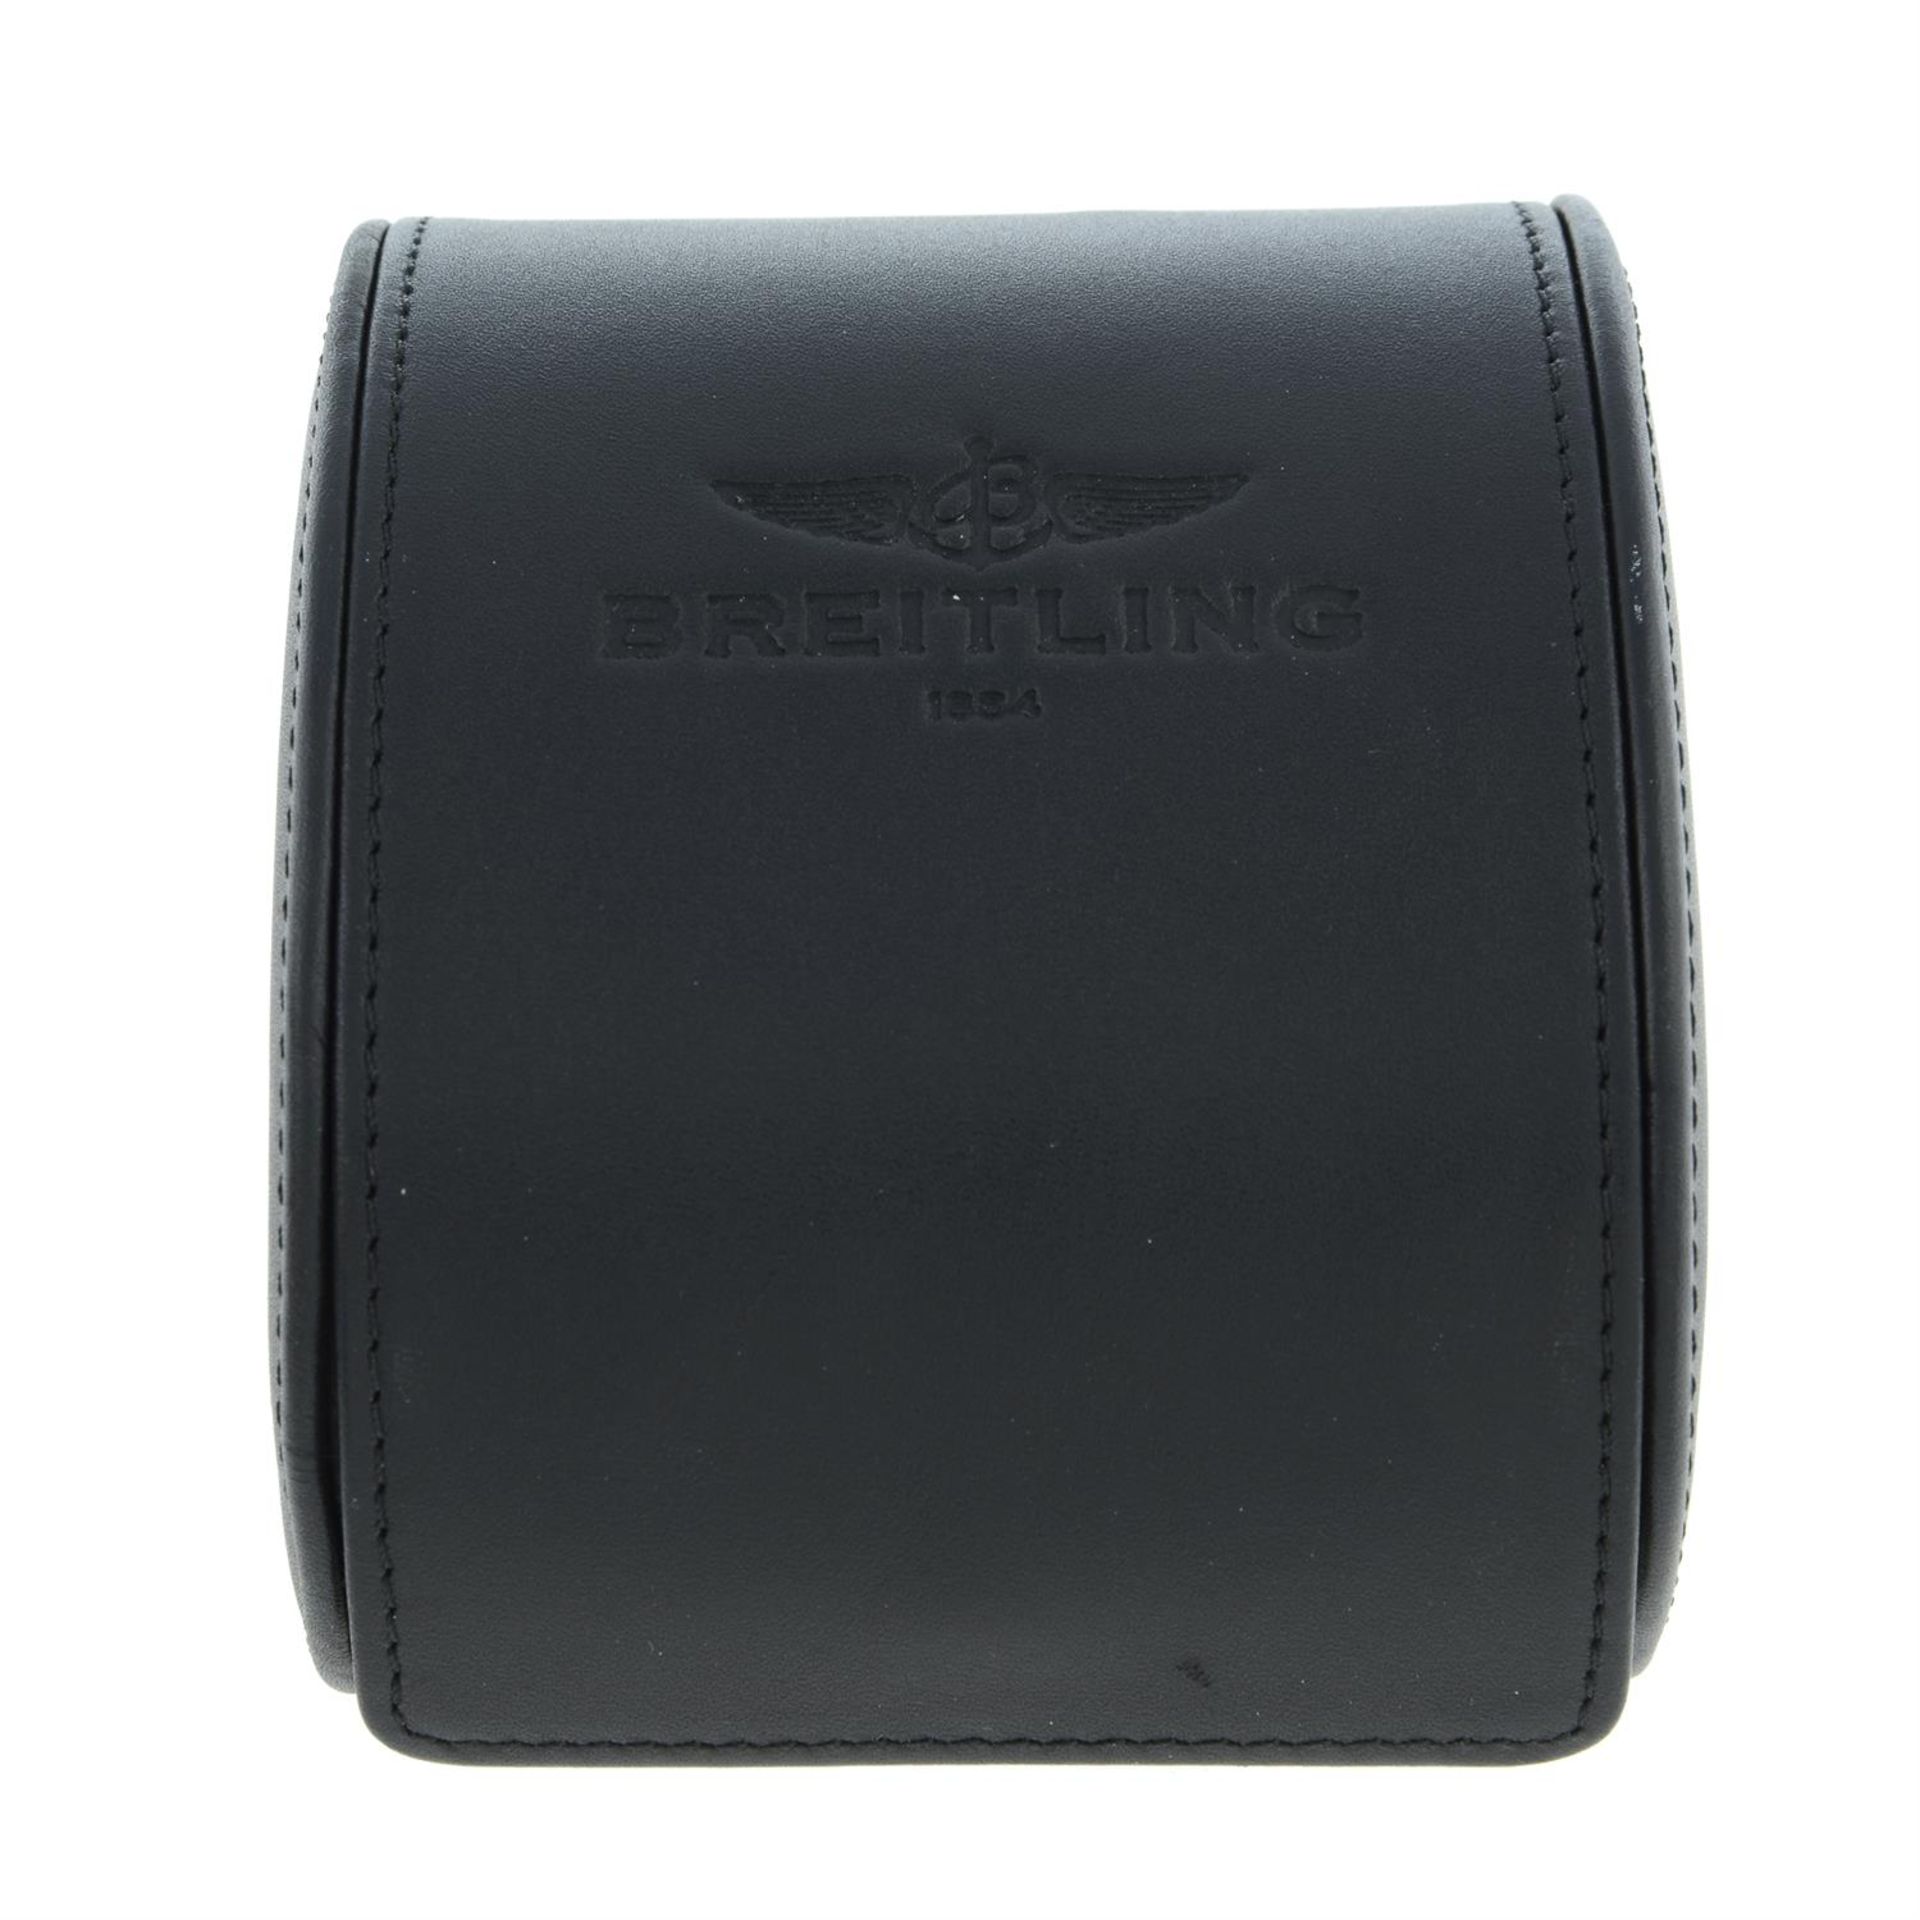 BREITLING - a stainless steel SuperOcean bracelet watch, 42mm. - Image 6 of 6